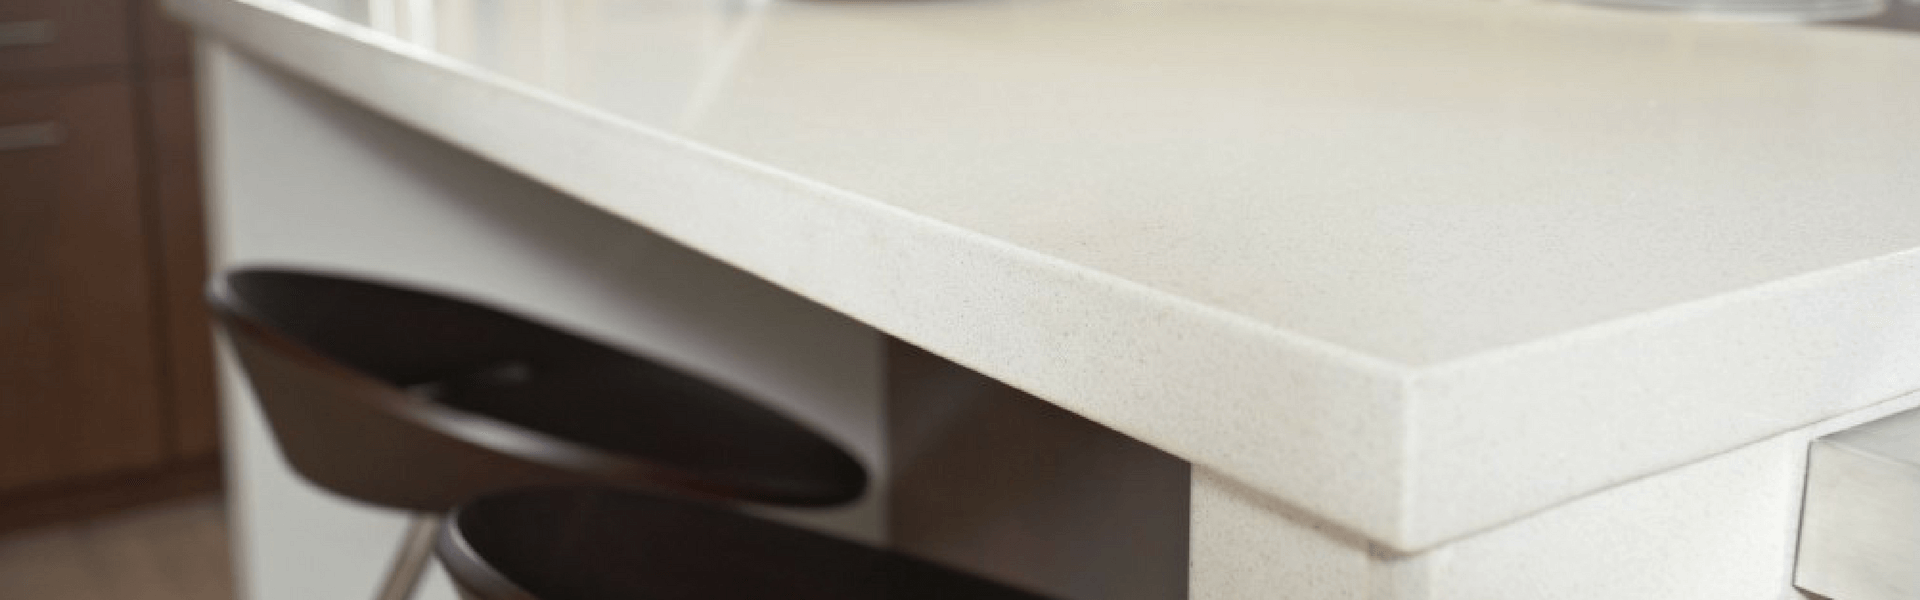 Eco By Cosentino Quartz Countertop Surface Created With Recycled